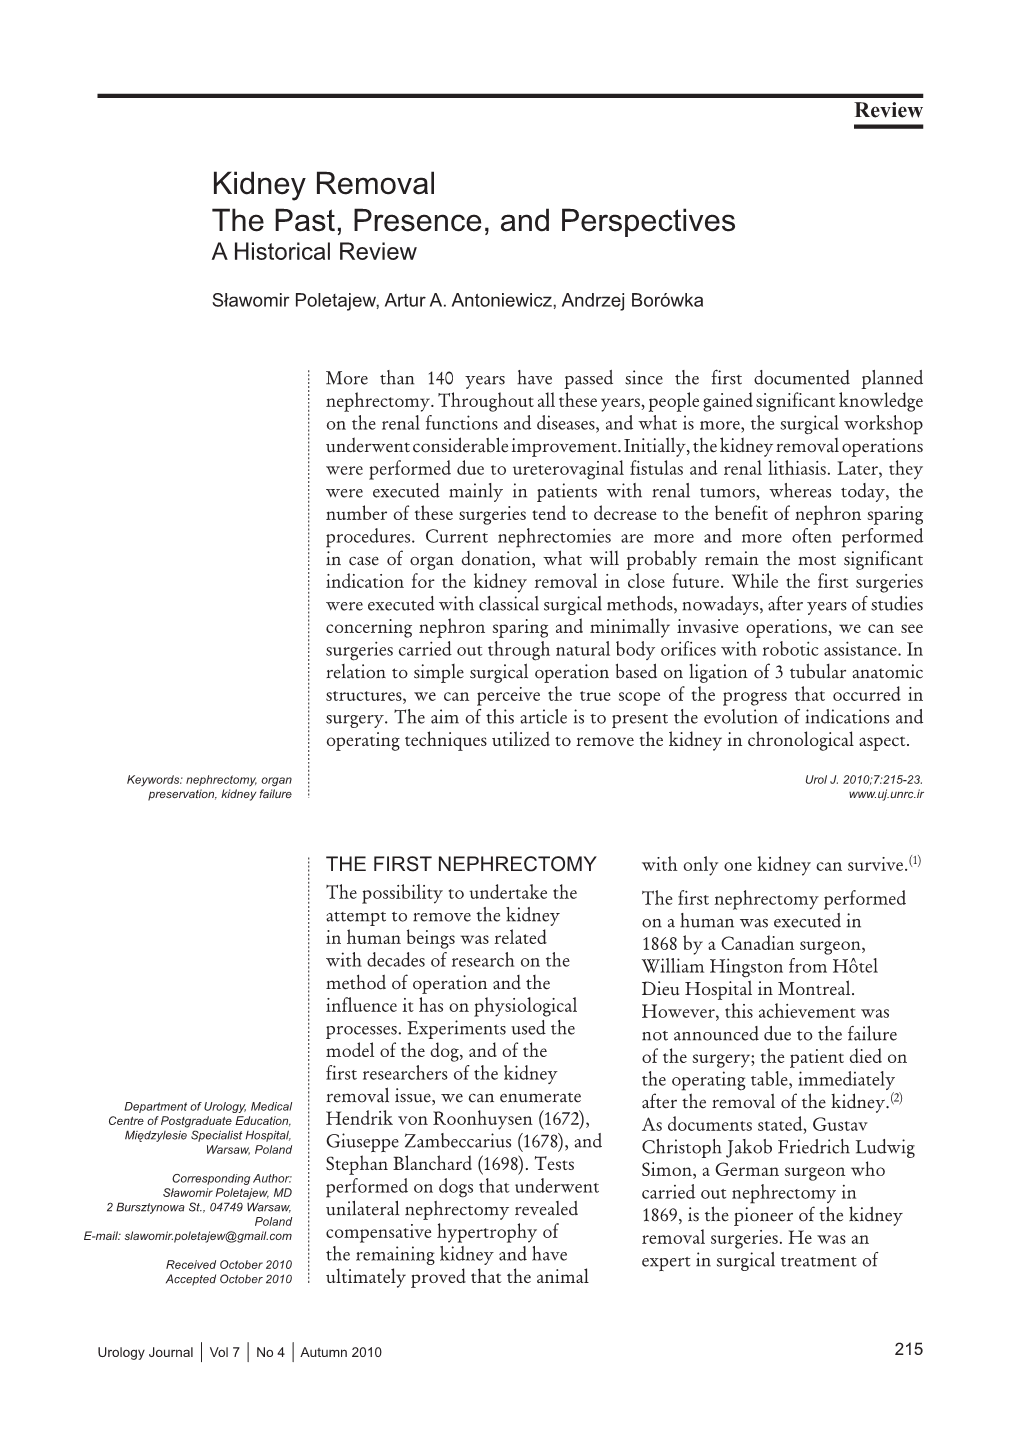 Kidney Removal the Past, Presence, and Perspectives a Historical Review